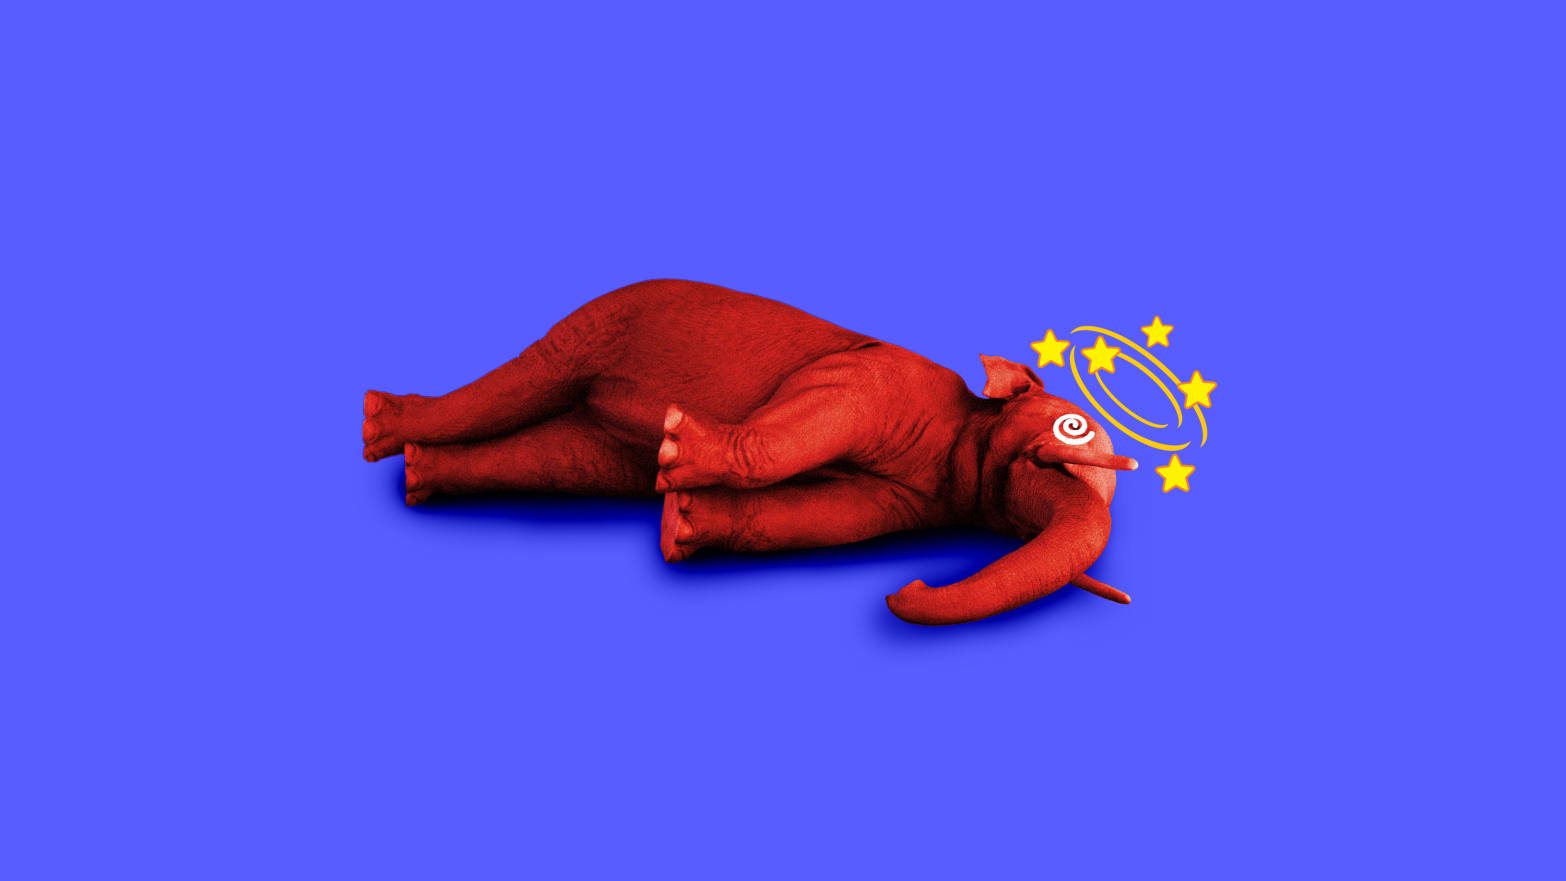 A photo illustration of a knocked out red elephant on the ground with stars over its head.